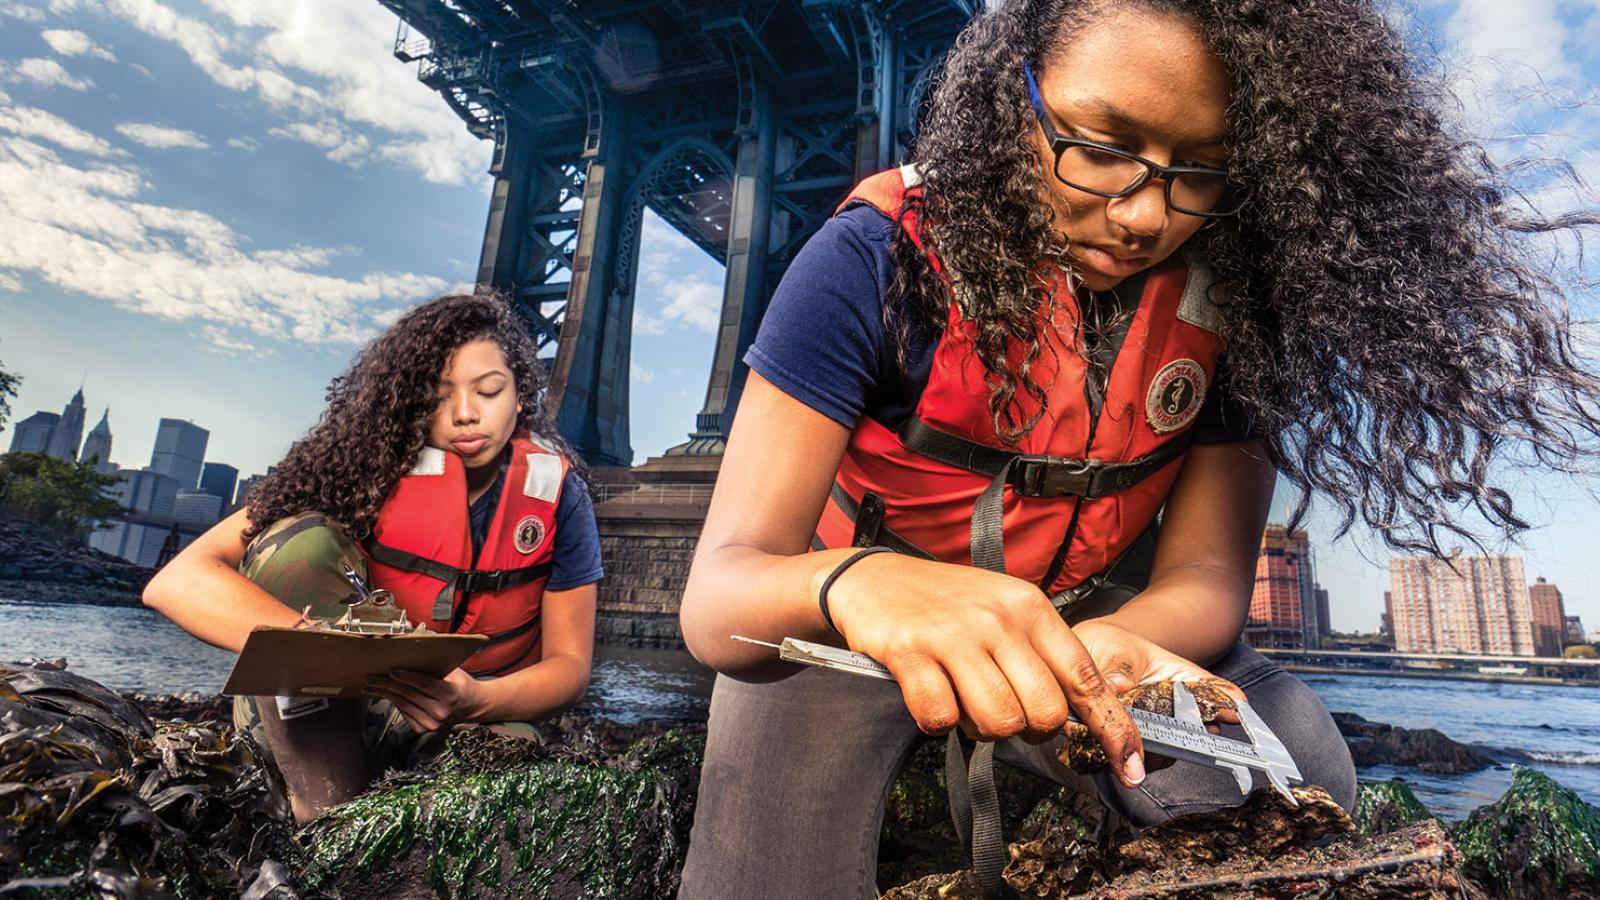 Two Pace students inspecting oysters in New York Harbor as part of the BIllion Oyster Project